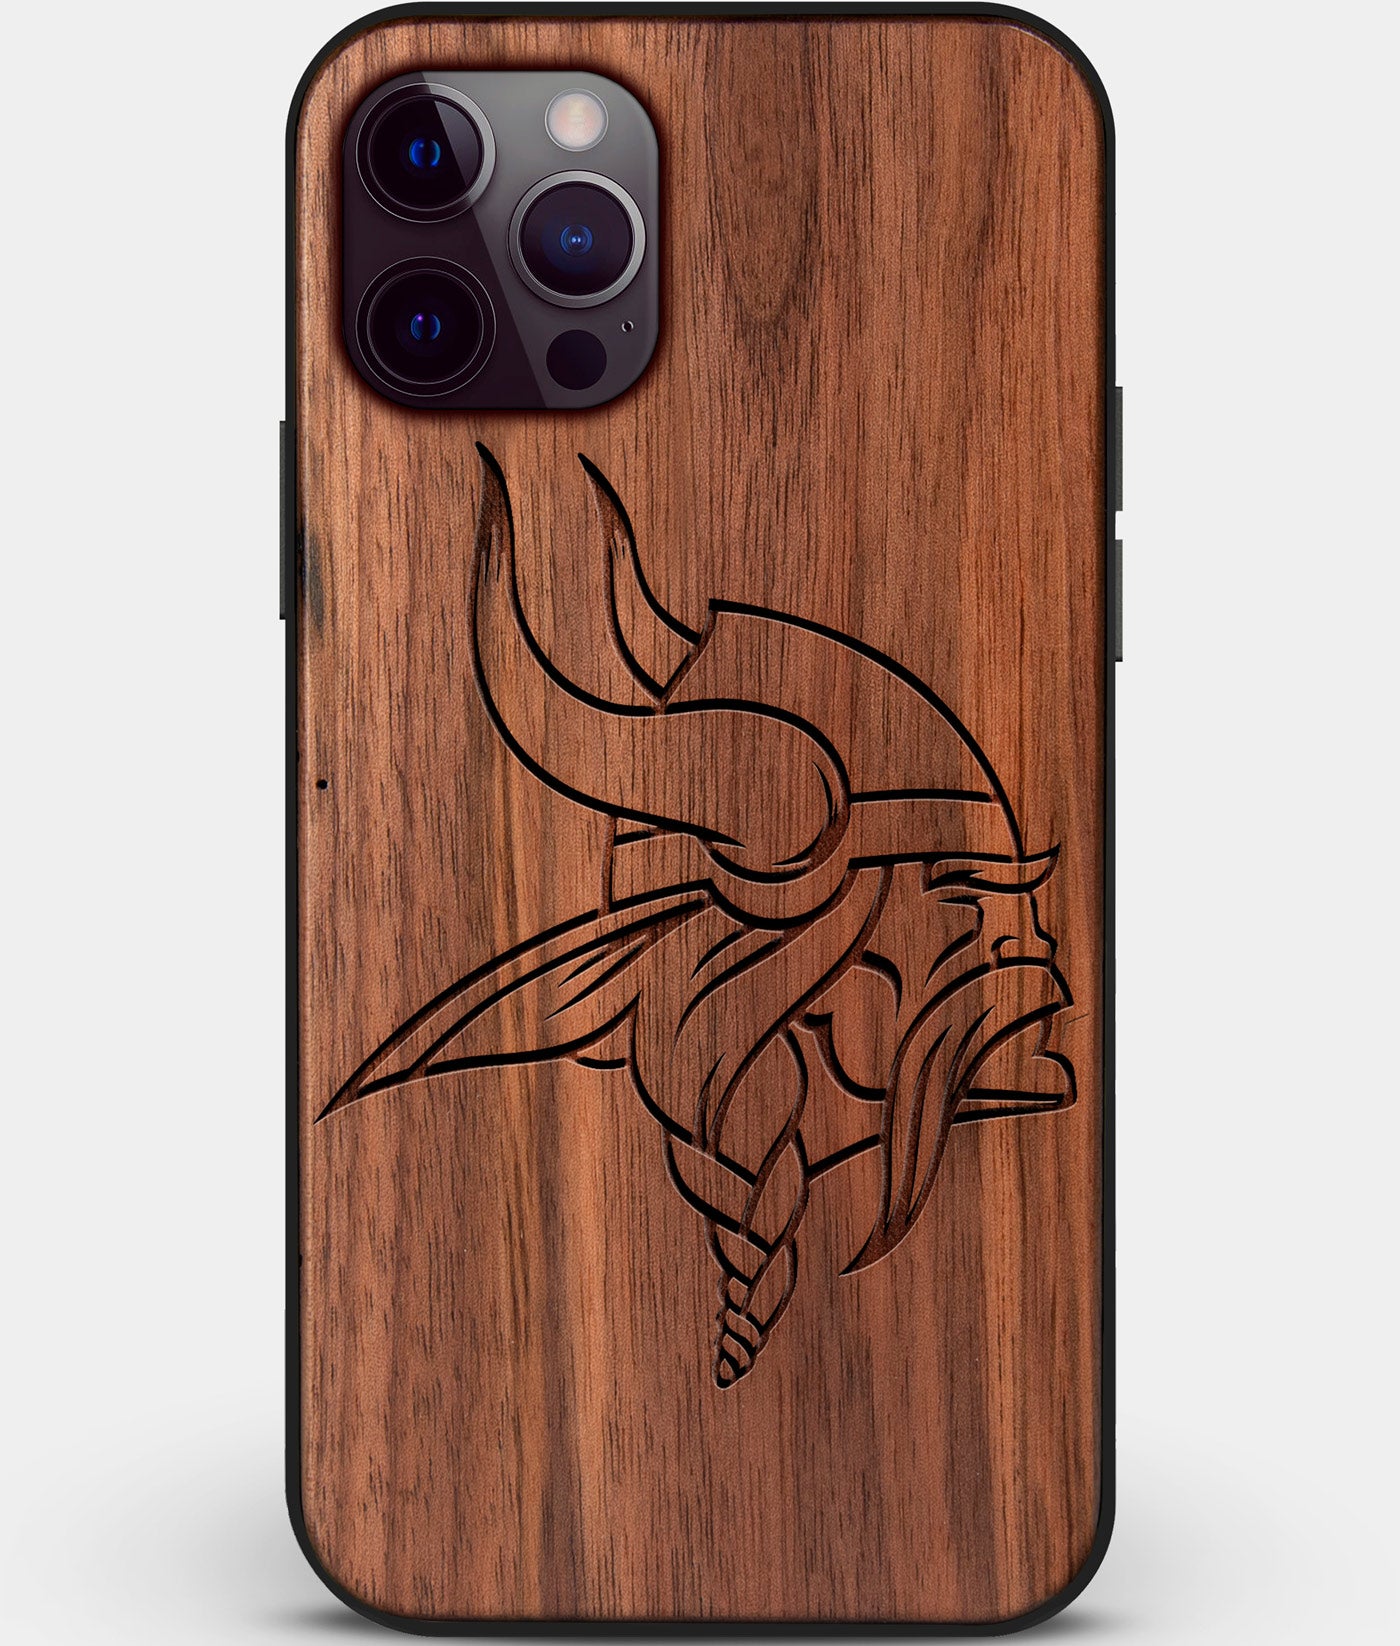 Custom Carved Wood Minnesota Vikings iPhone 12 Pro Case | Personalized Walnut Wood Minnesota Vikings Cover, Birthday Gift, Gifts For Him, Monogrammed Gift For Fan | by Engraved In Nature